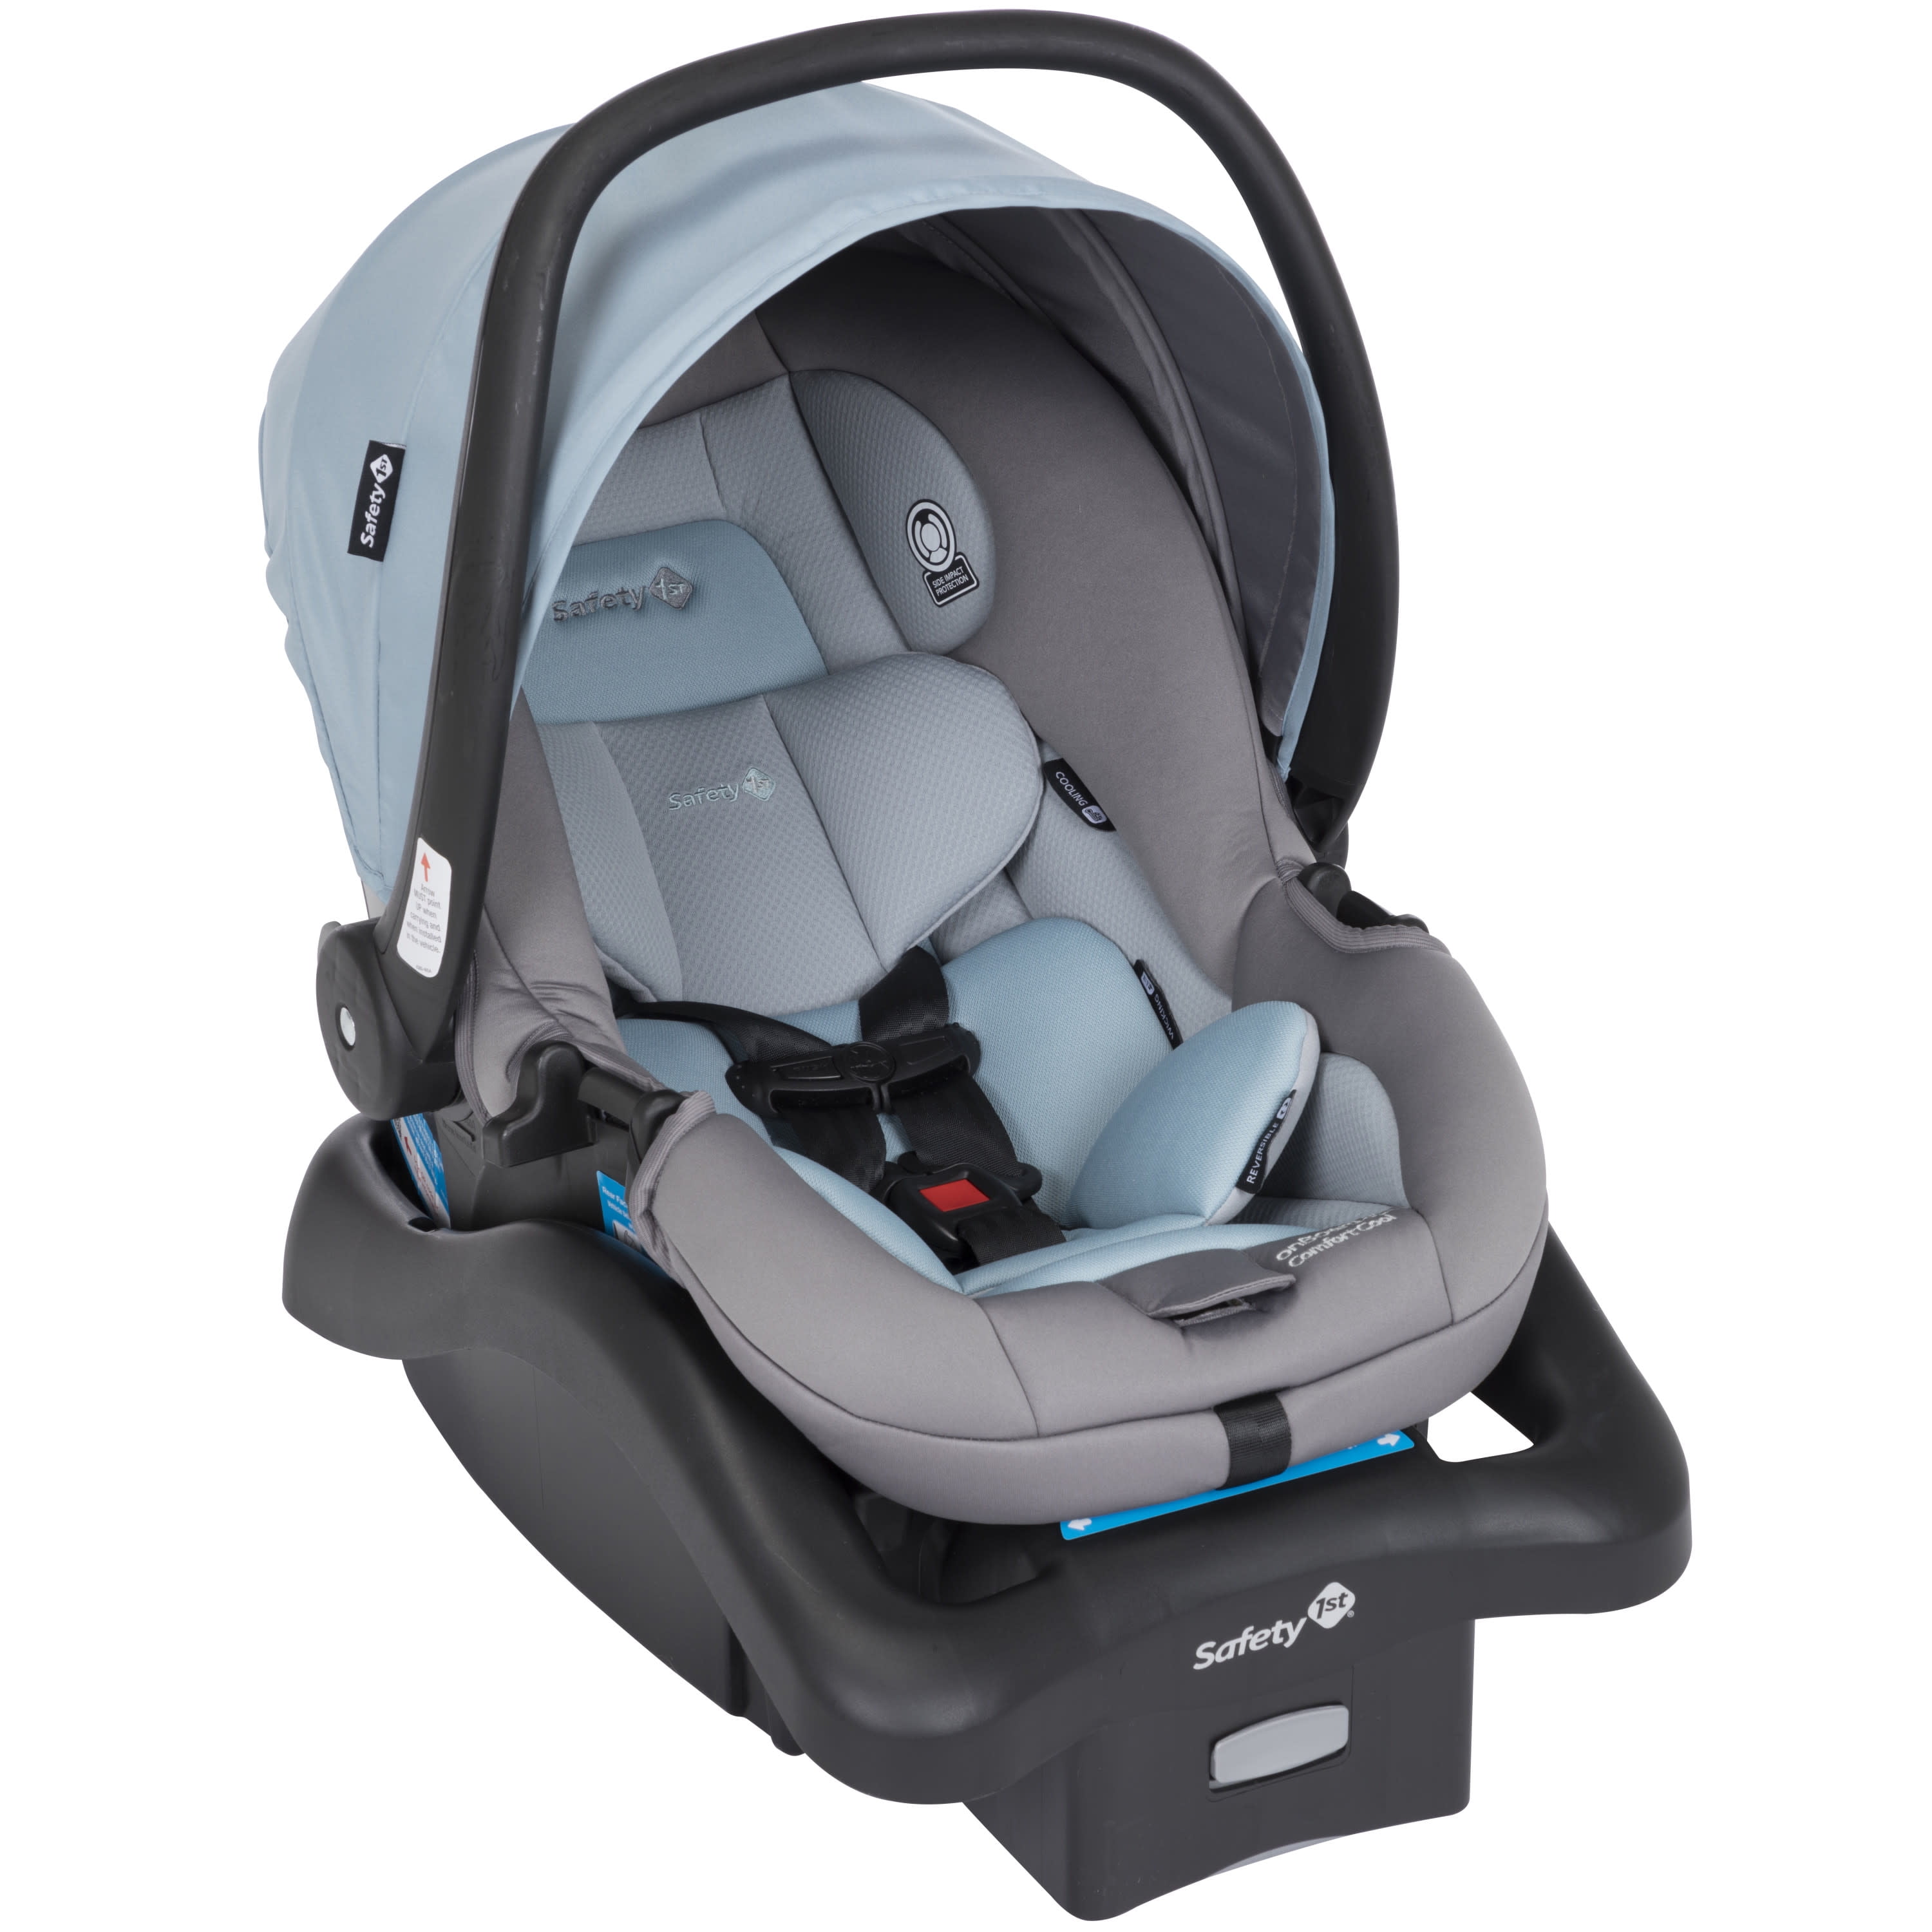 Pebble Beach Safety 1st onBoard 35 LT Comfort Cool Infant Car Seat 